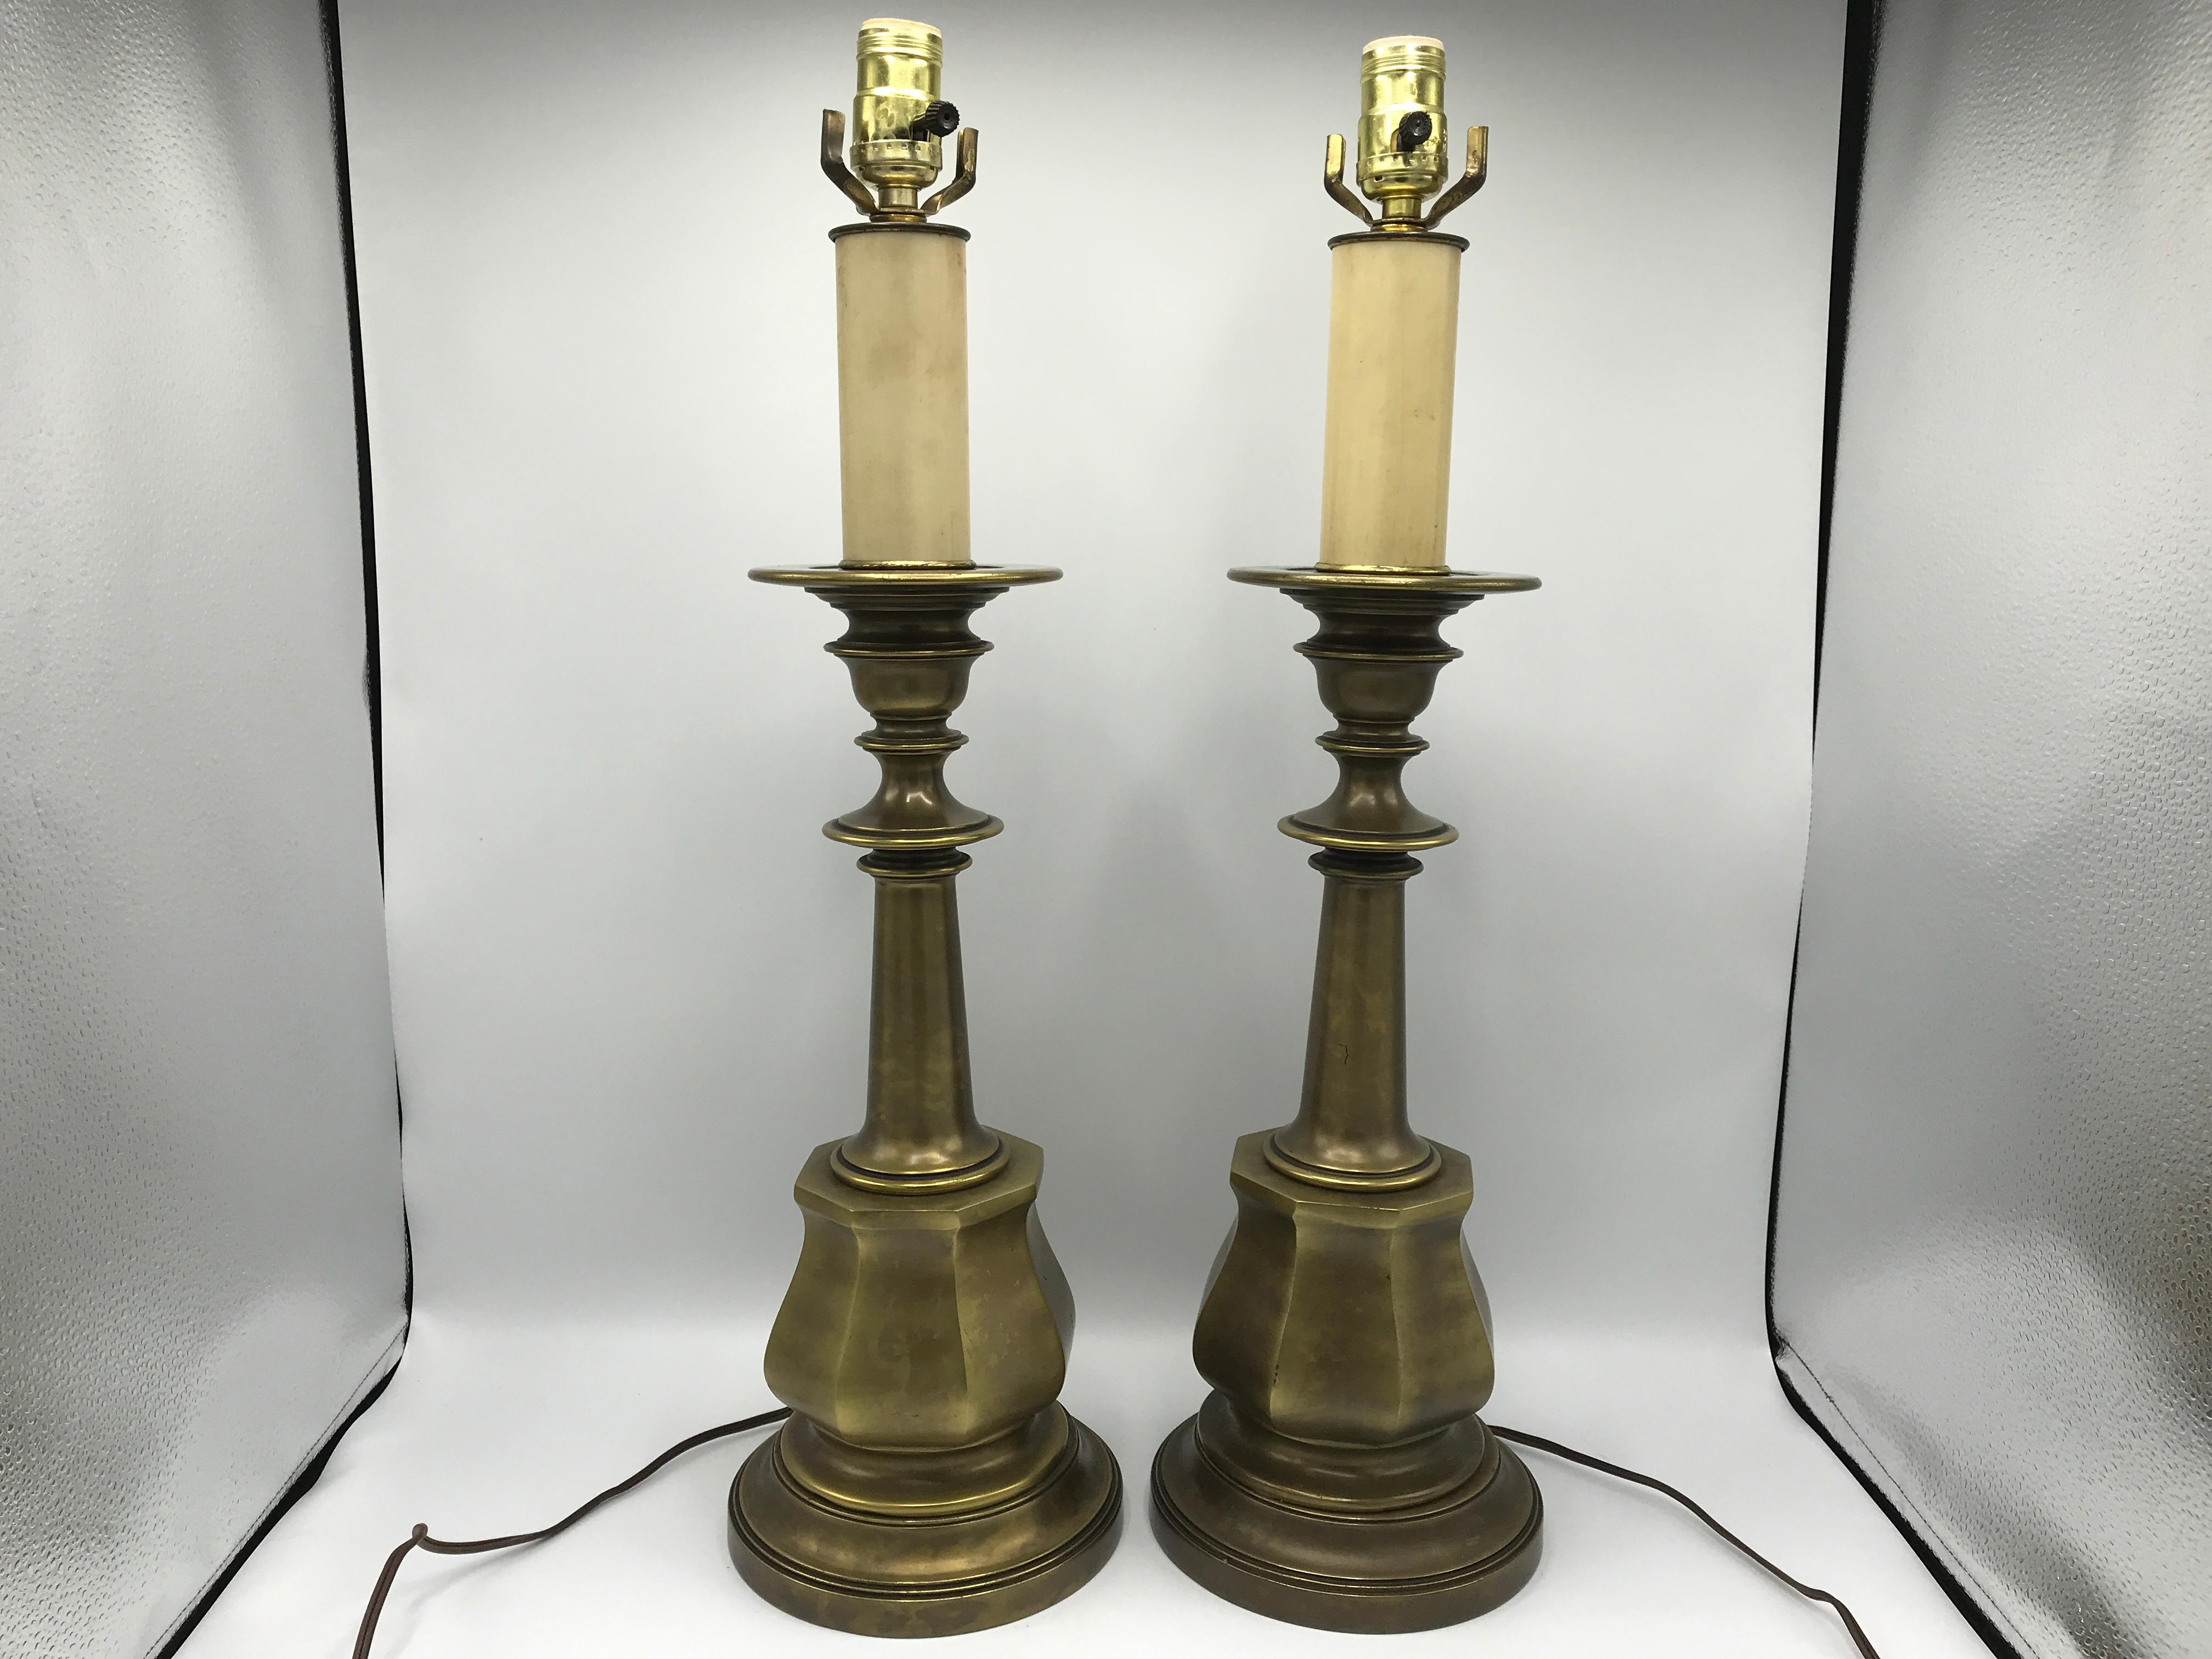 Listed is a fabulous, pair of oversized Hollywood Regency, 1980s brushed brass candlestick lamps. The pair has a lovely all-over, patina. Heavy, weighing nearly 18lbs for the pair.